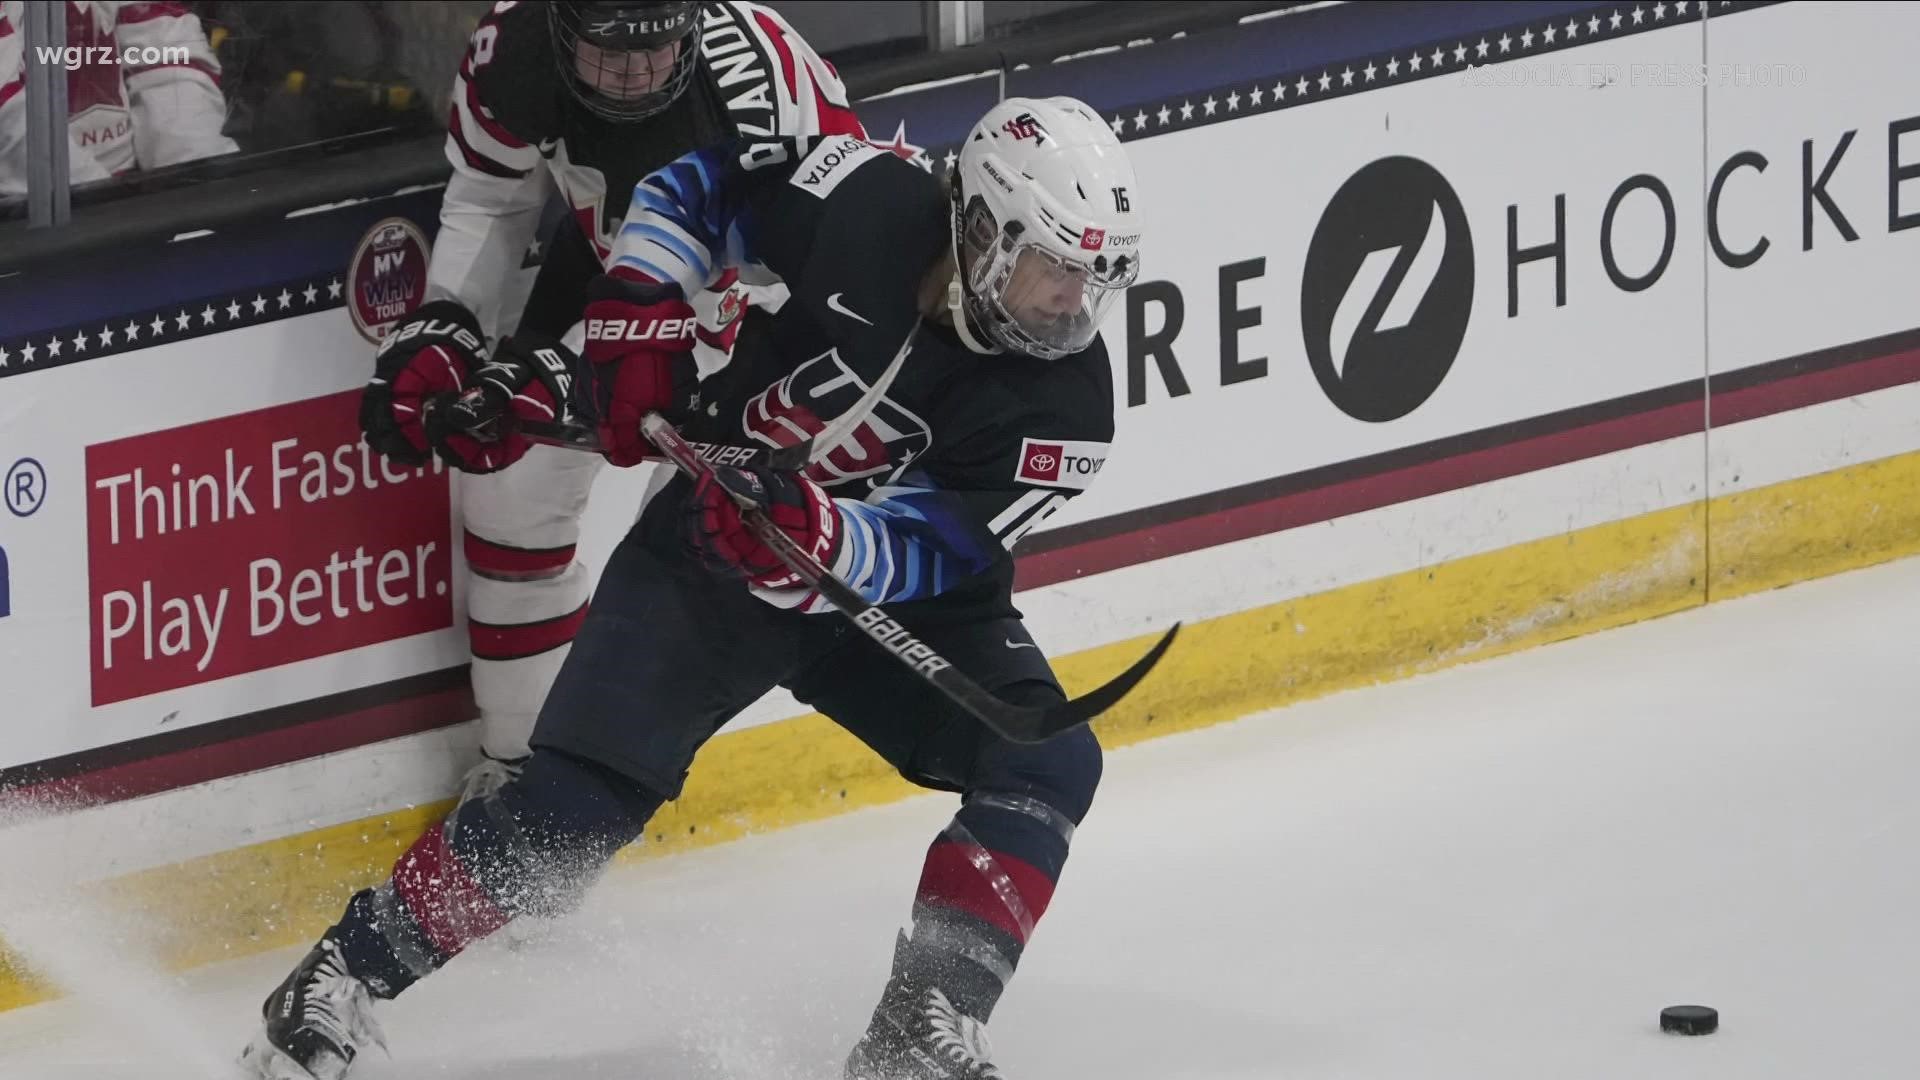 Williamsville native Hayley Scamurra dropped everything but the gloves when Team USA came calling, and now she's onto Beijing, ready to play Finland on Thursday.